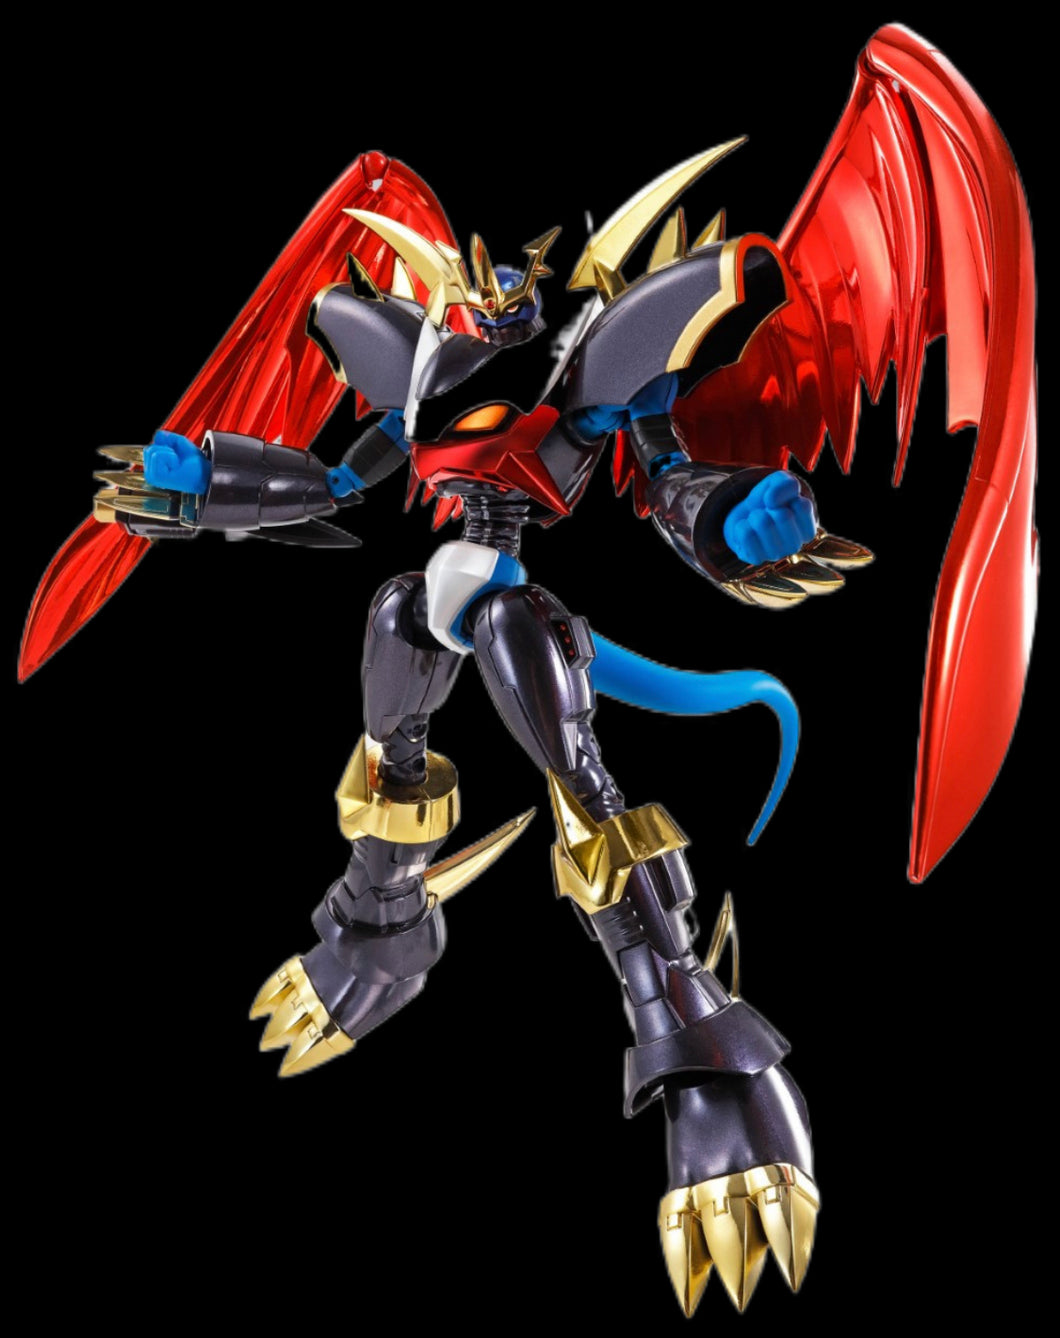 DIGIMON ADVENTURE 02: IMPERIALDRAMON FIGHTER MODE PREMIUM COLOR EDITION S.H.FIGUARTS ACTION FIGURE BY BANDAI TAMASHII NATIONS